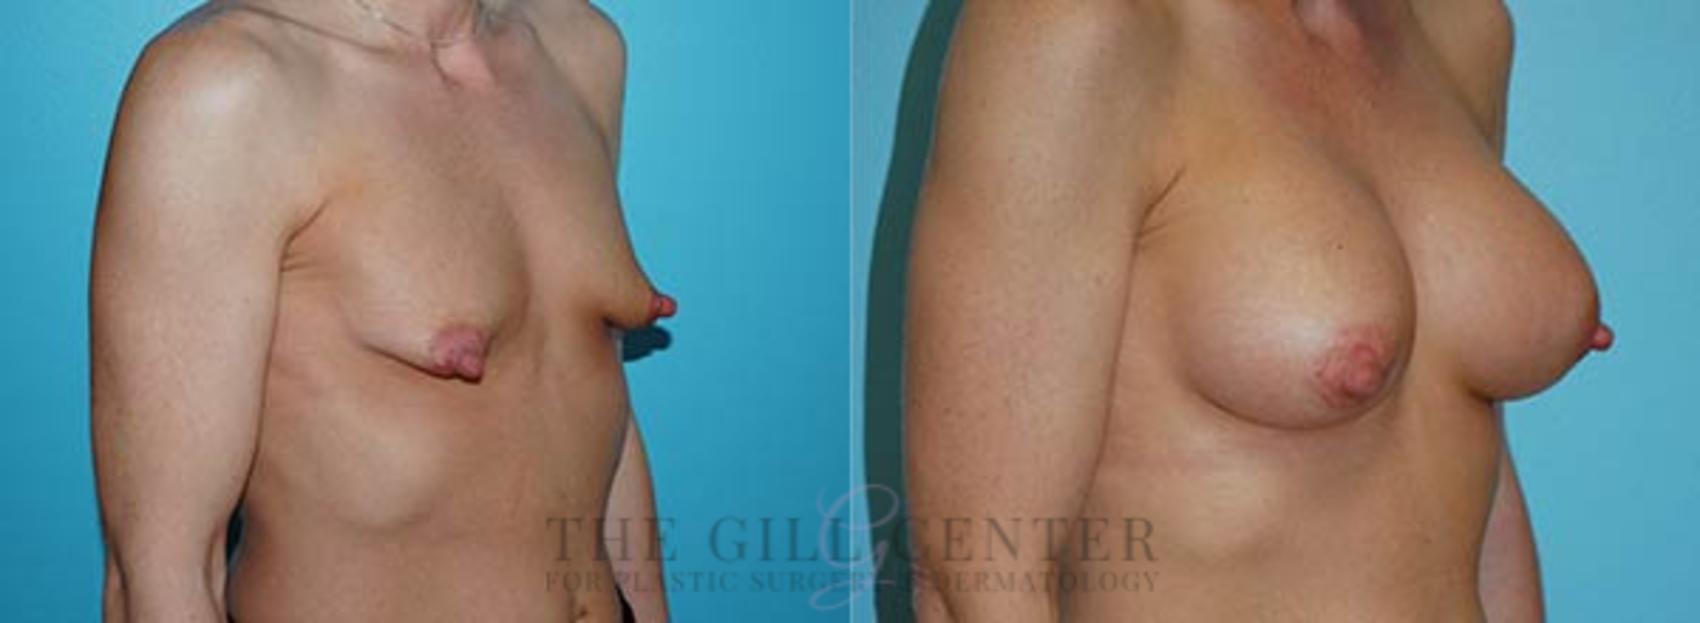 Tubular Breast Deformity Correction Case 358 Before & After Right Oblique | The Woodlands, TX | The Gill Center for Plastic Surgery and Dermatology